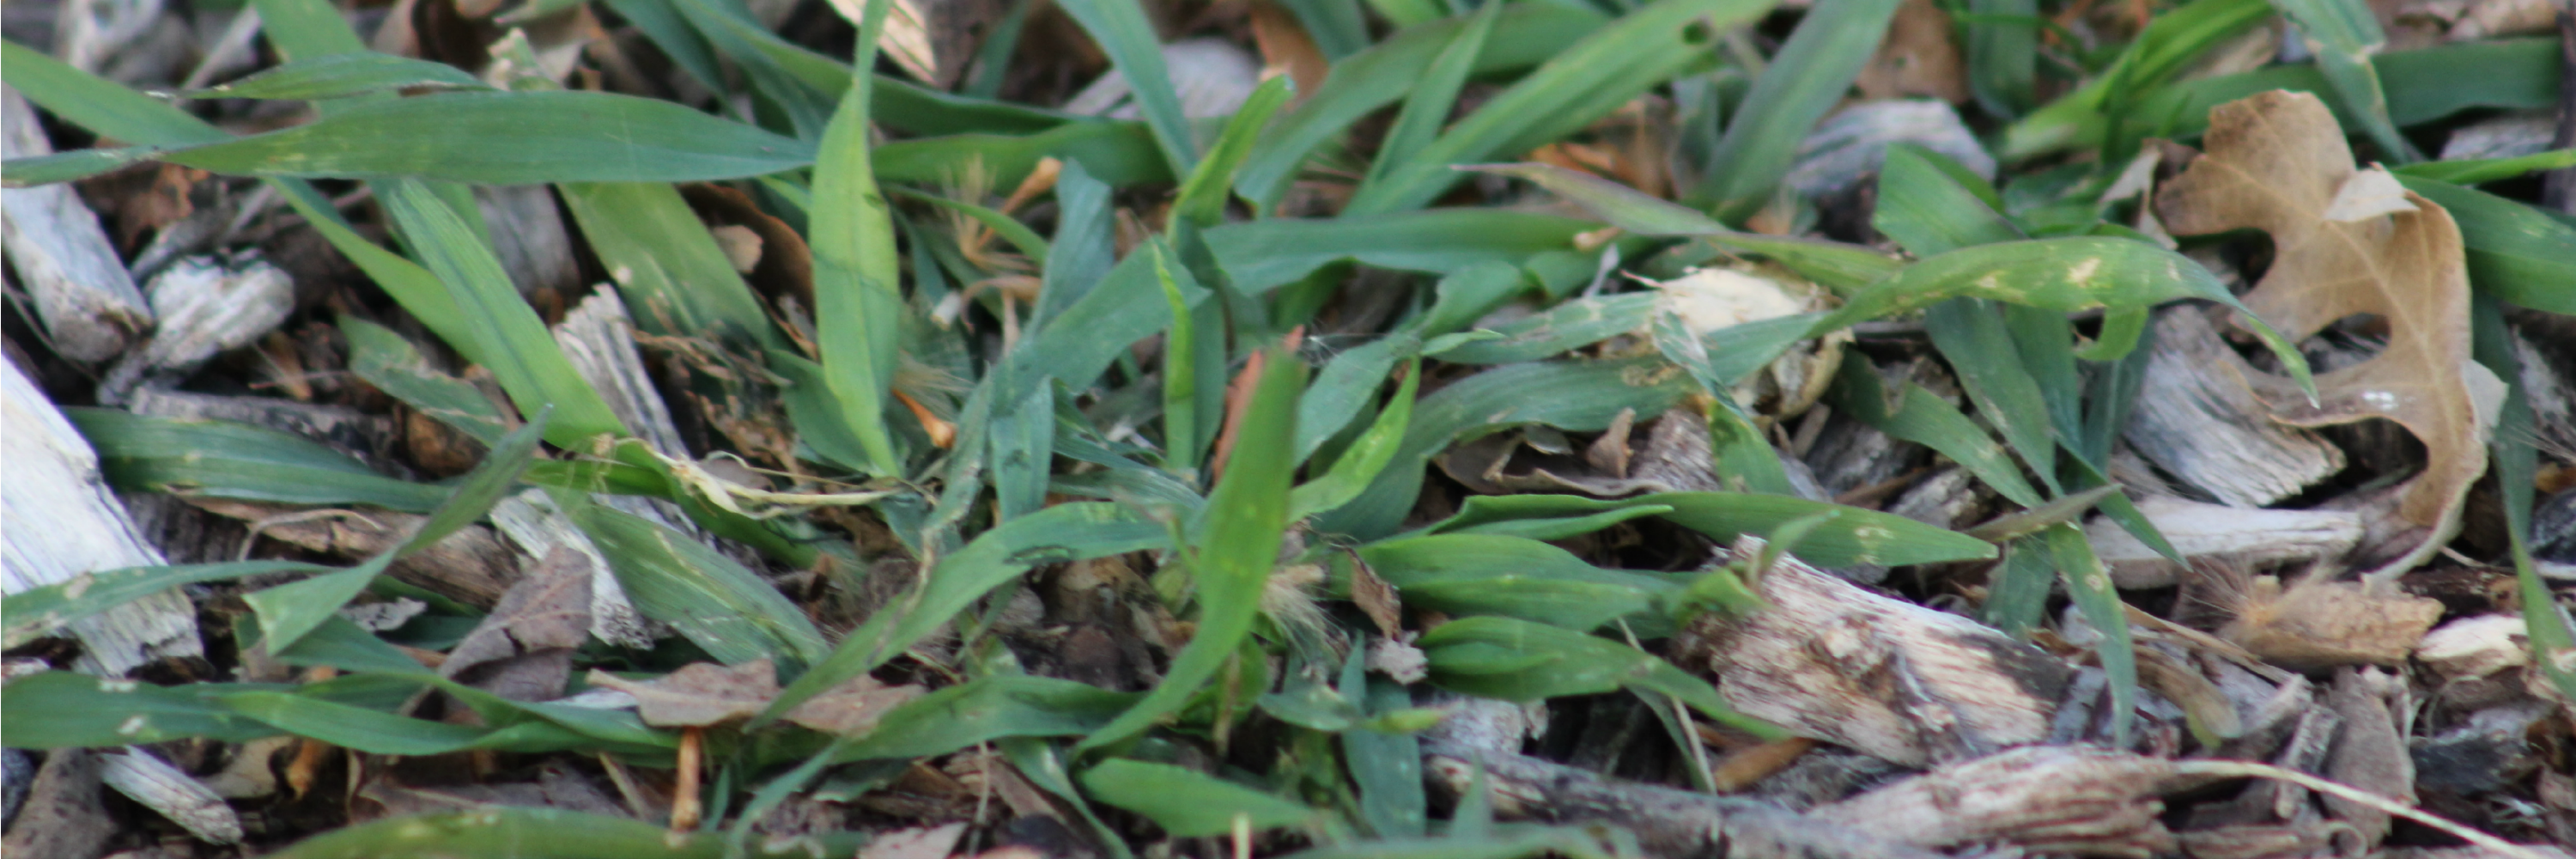 Weed growing, Crabgrass Banner for Anne of Green Gardens